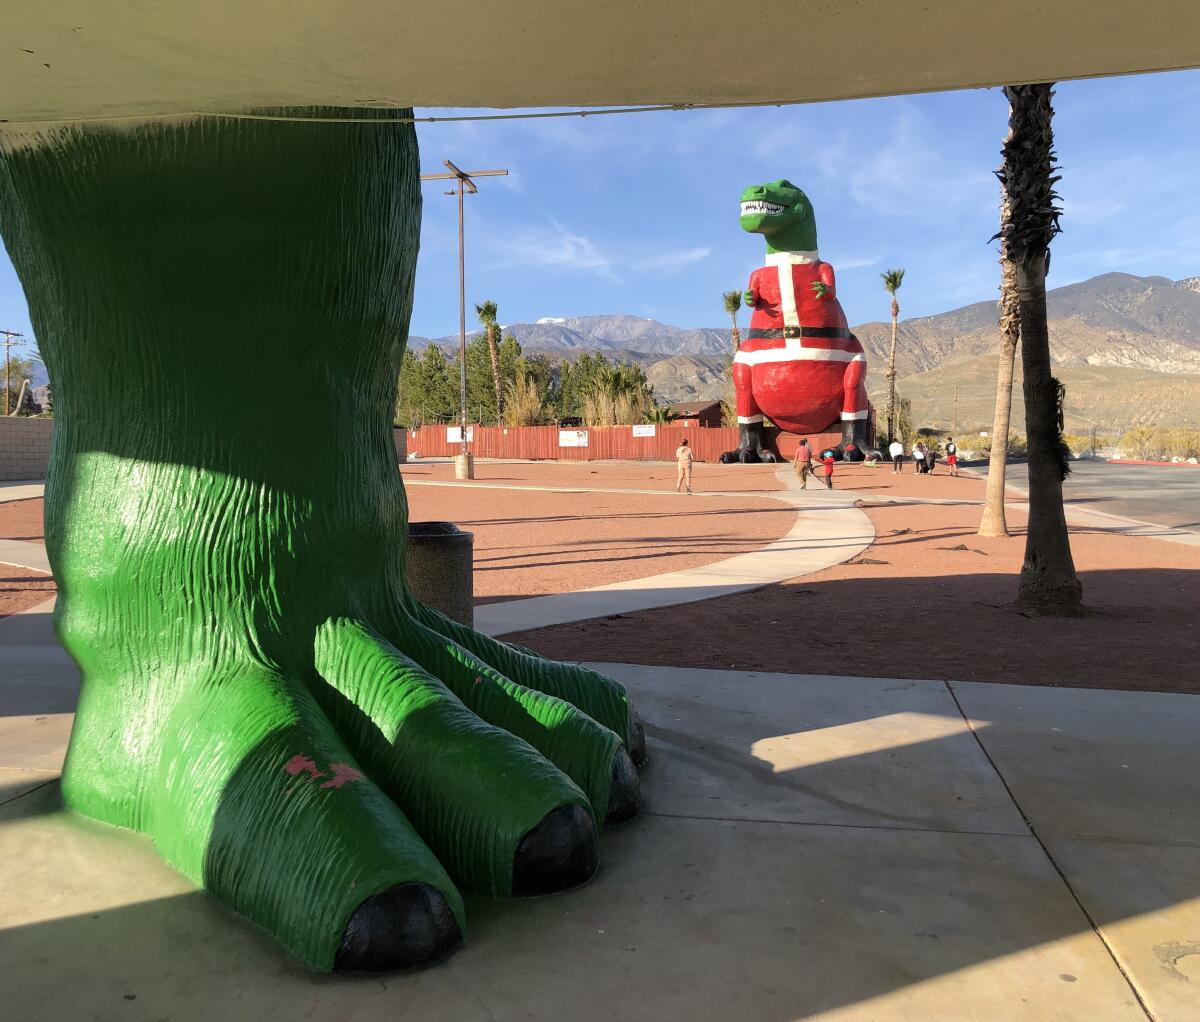 A large dinosaur foot is shown in the foreground with a large T-rex in a Santa suit in the background.